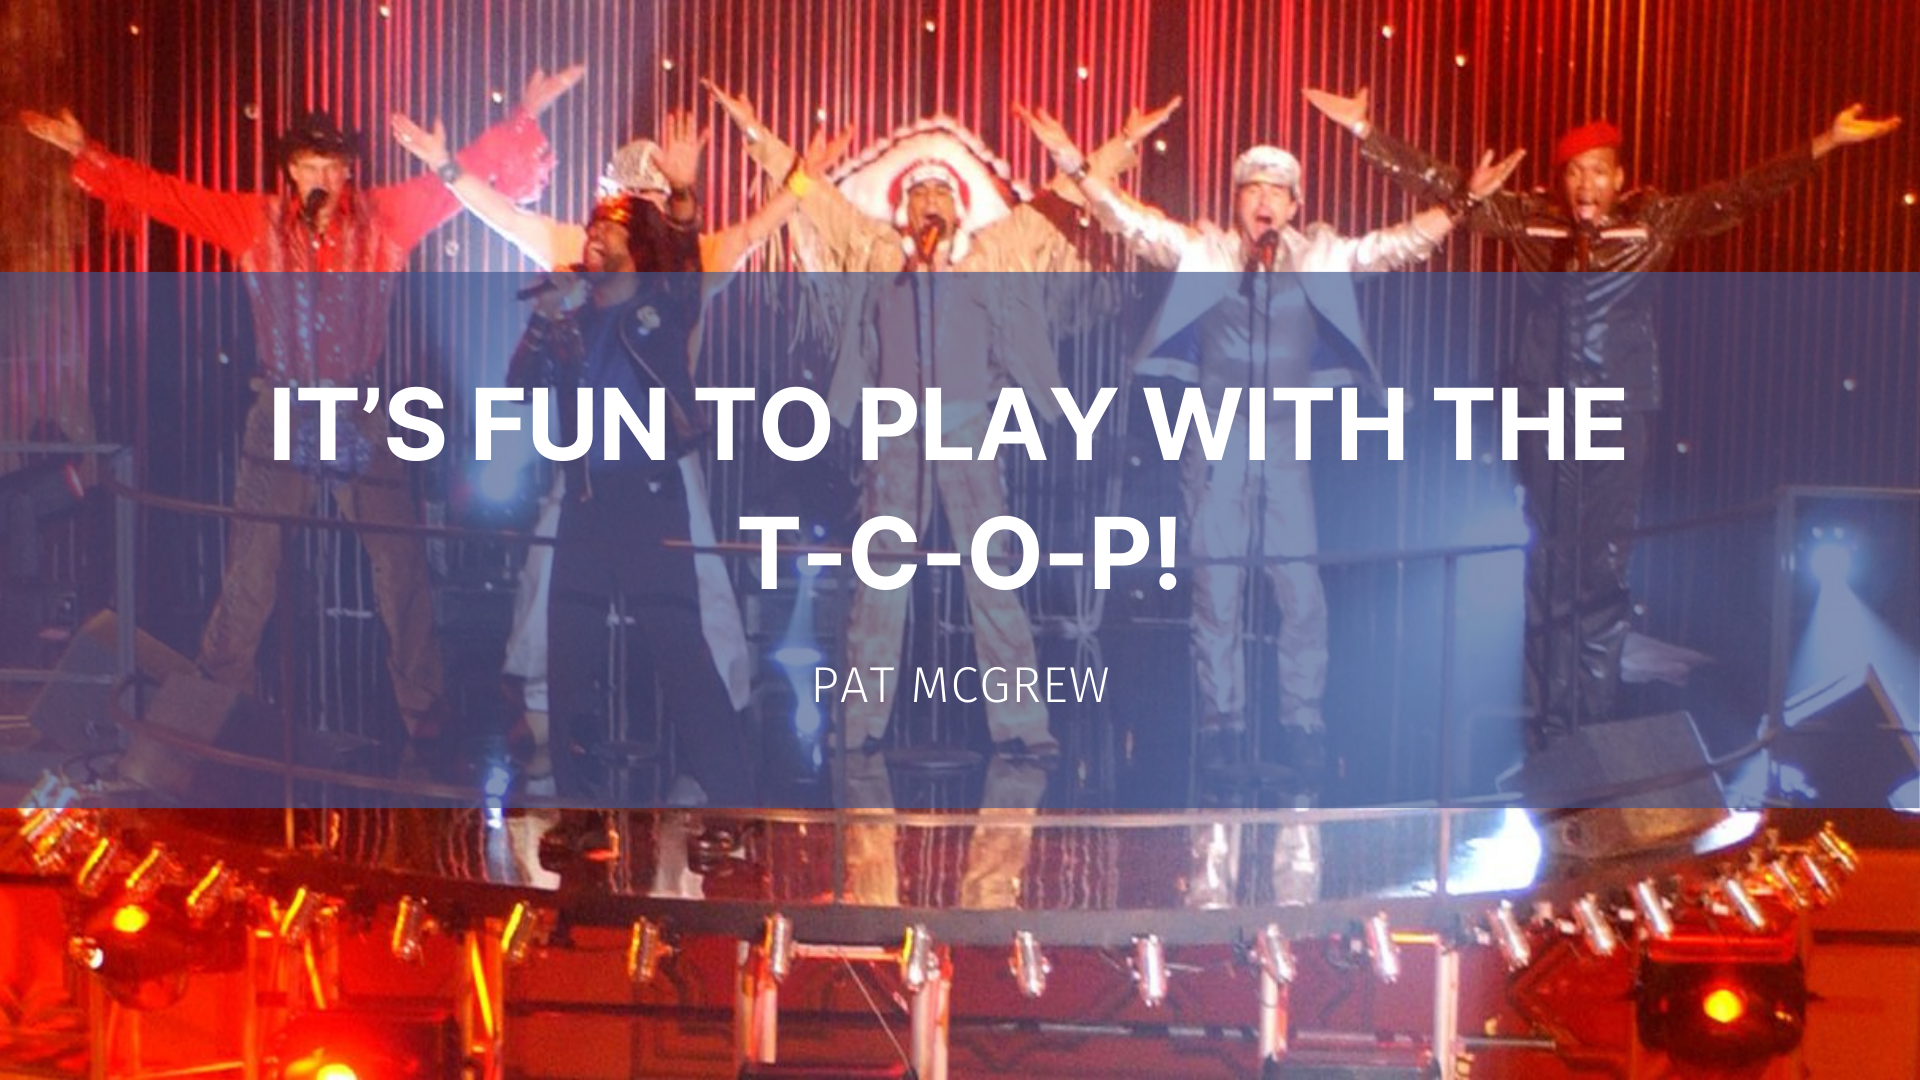 Featured image for “It’s Fun to Play with the T-C-O-P!”